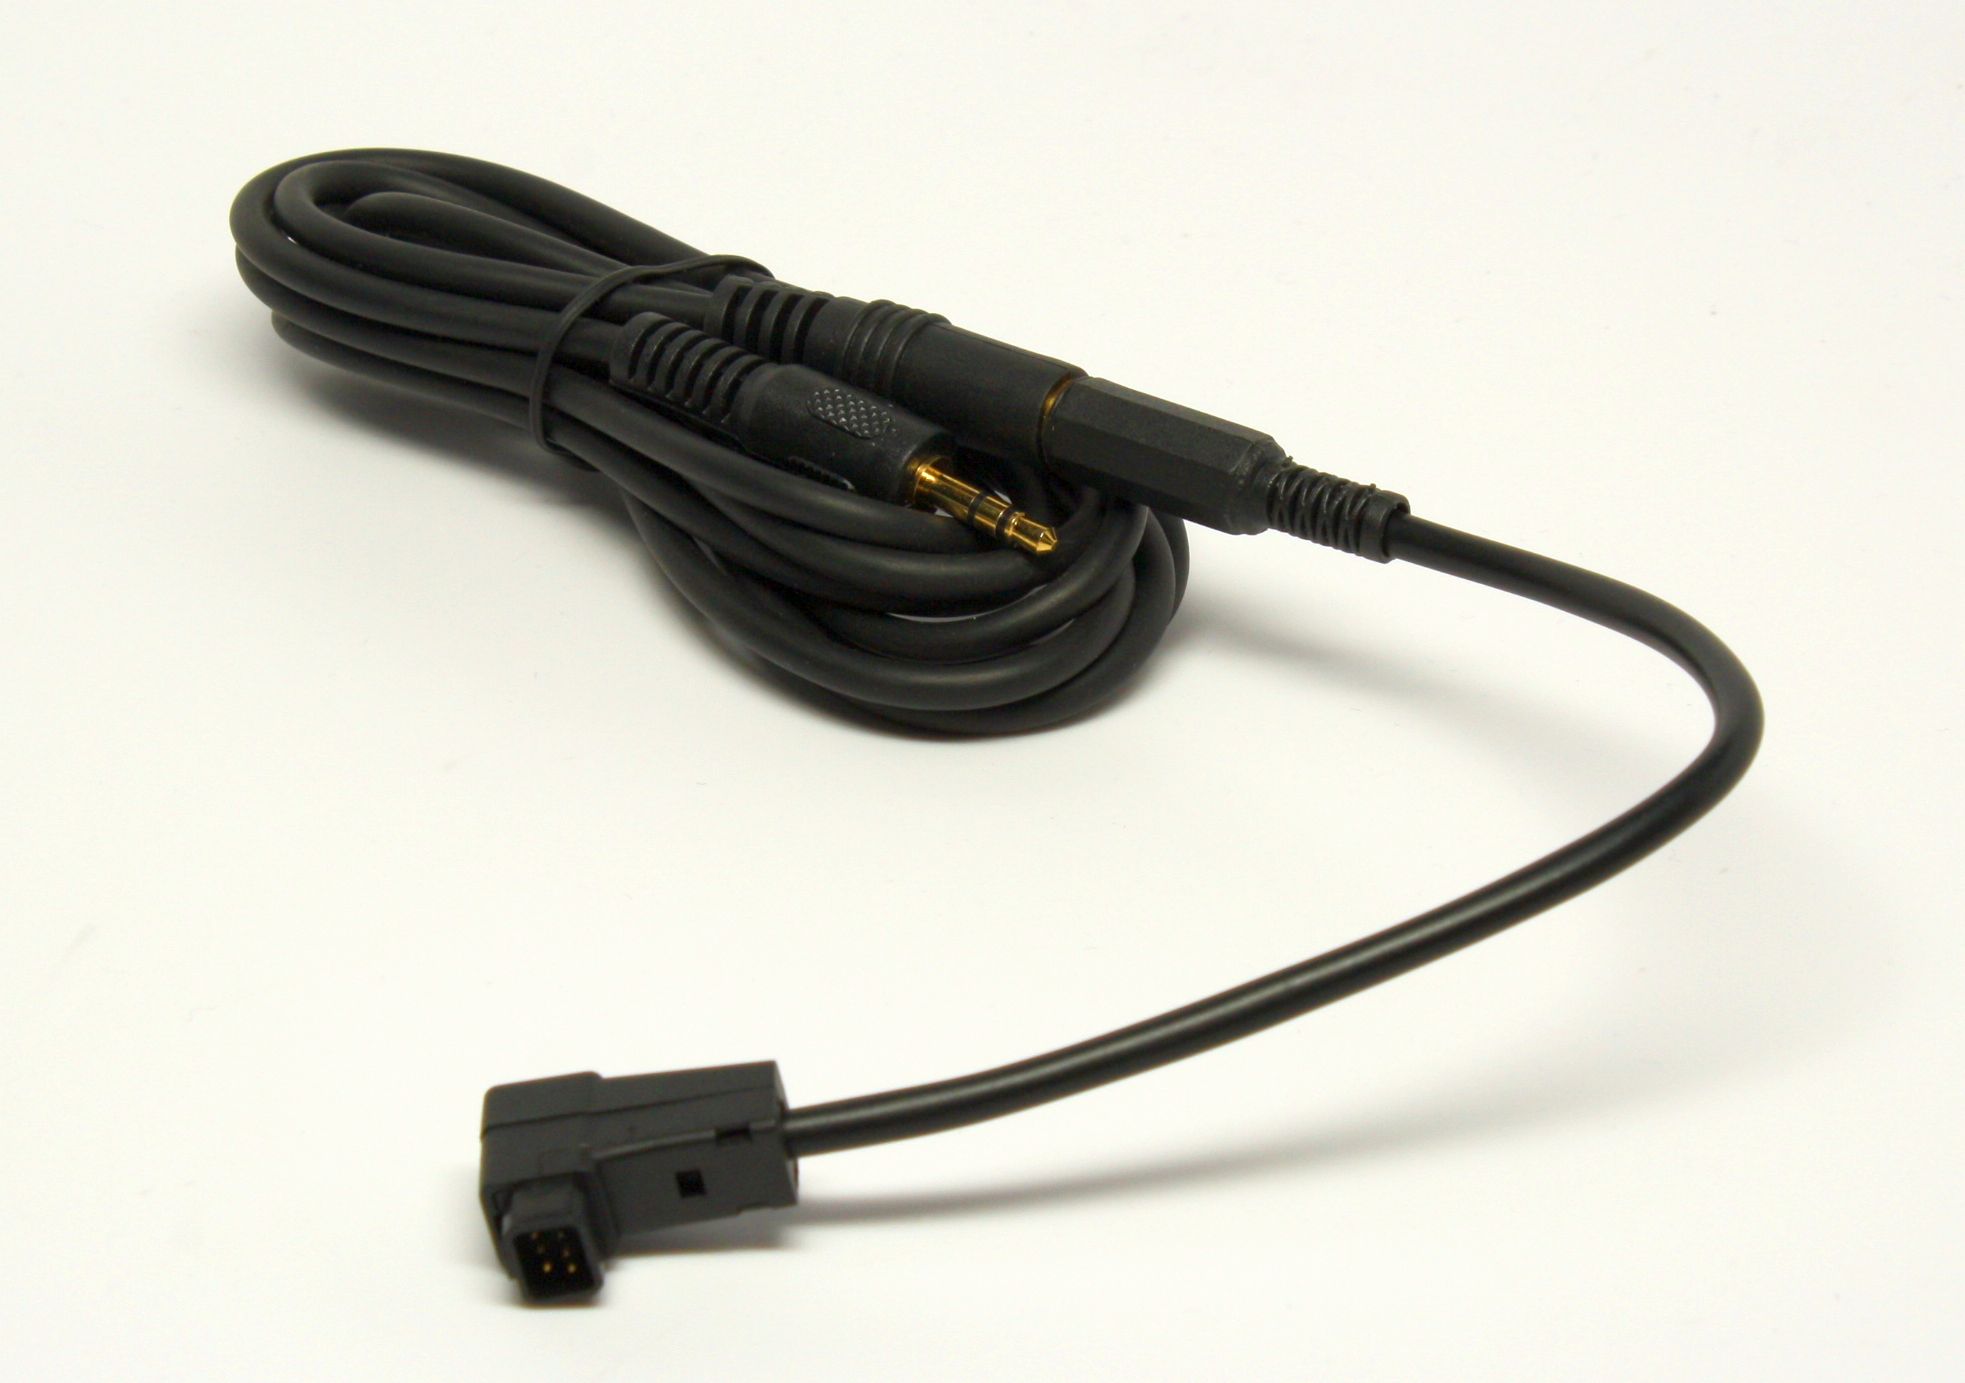 ForceFly Futaba Cable. The ForceFly Futaba Cable allows the ForceFly Computer to be connected to Futaba radios equipped with a trainer port.